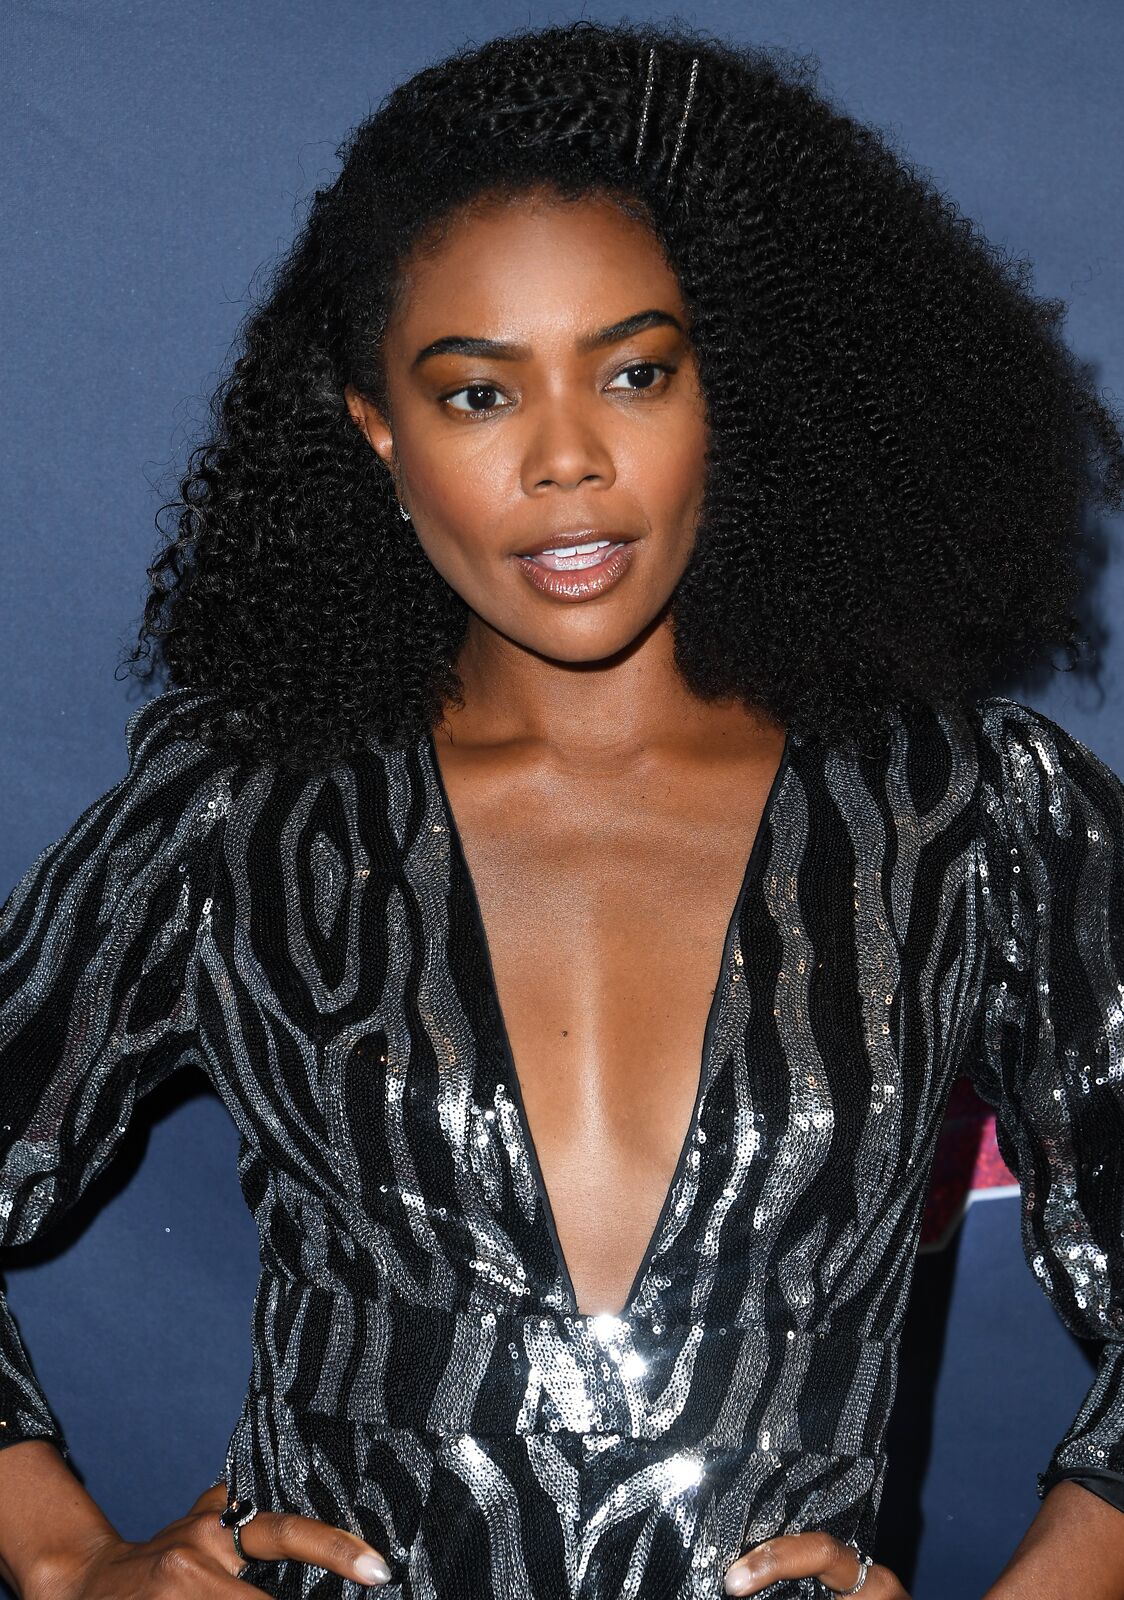 Gabrielle Union at the "America's Got Talent" Season 14 Live Show Red Carpet in 2019 in Los Angeles | Source: Getty Images